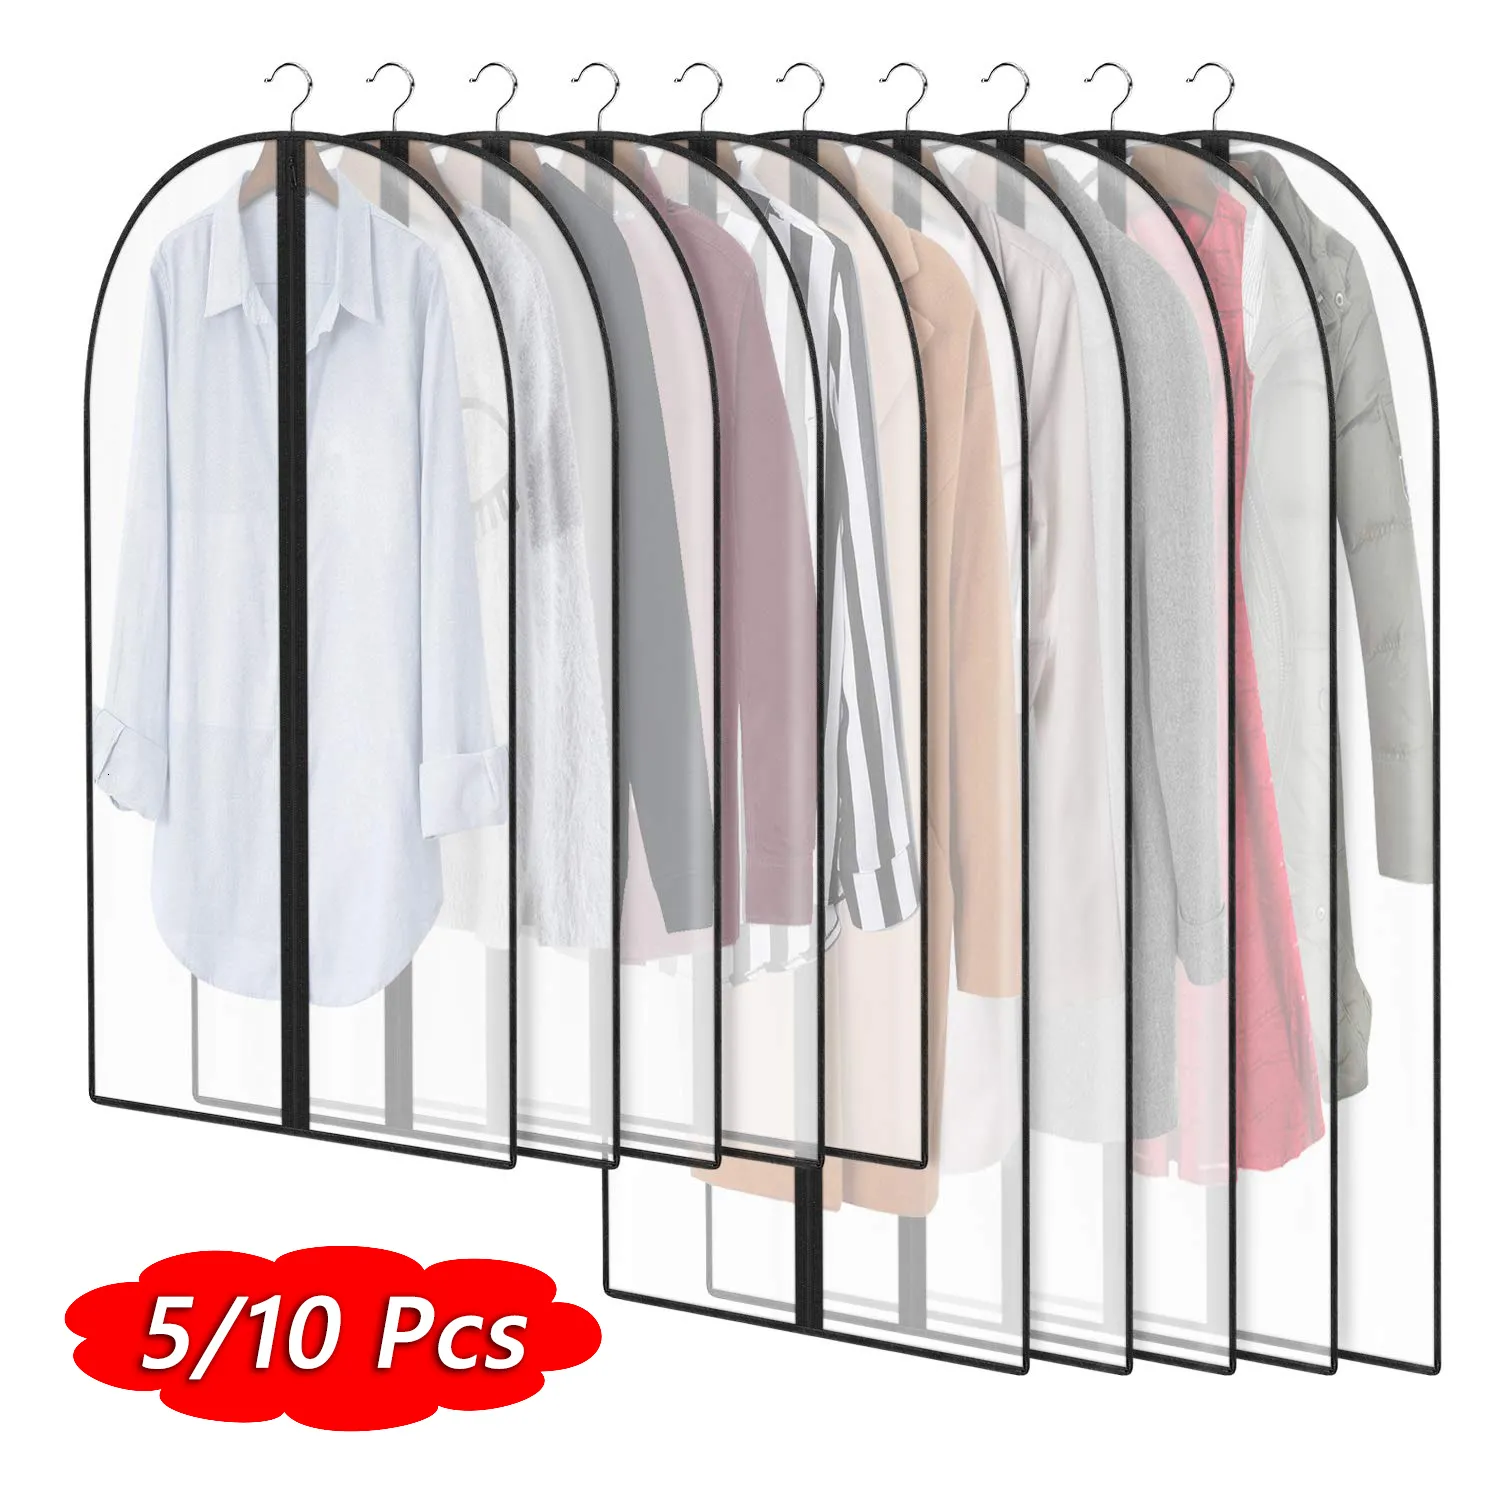 Dust Cover 510Pcs Clothes Hanging Garment Dress Clothes Suit Coat Dust Cover Home Storage Bag Pouch Organizer Wardrobe Hanging Clothing 230208